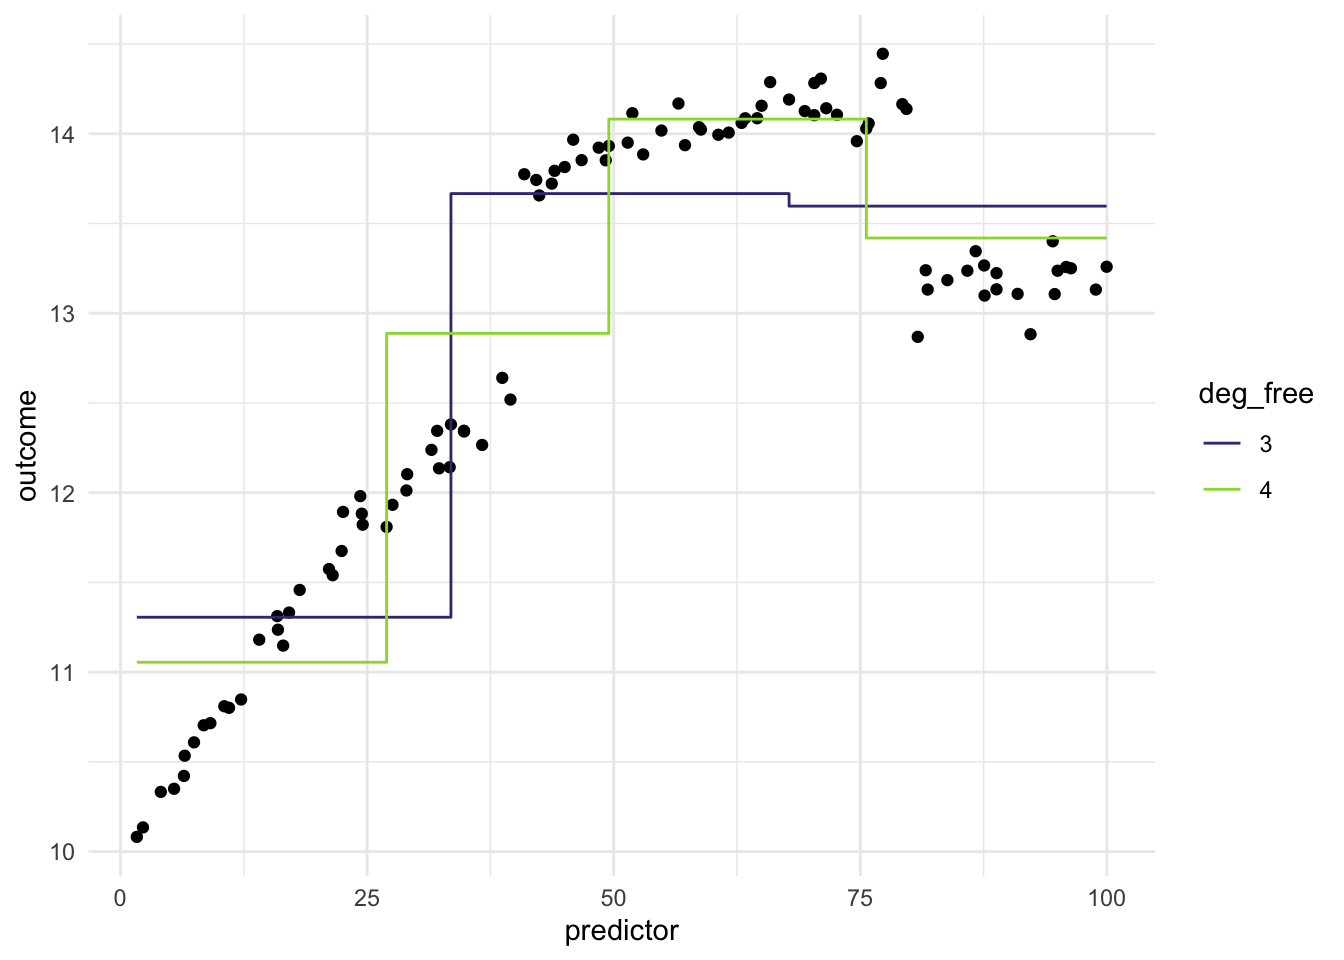 Scatter chart. Predictor along the x-axis and outcome along the y-axis. The data has some wiggliness to it with two big breaks in the curve. Both of the fitted lines doesn't match the data, as the breaks don't align with the data set.